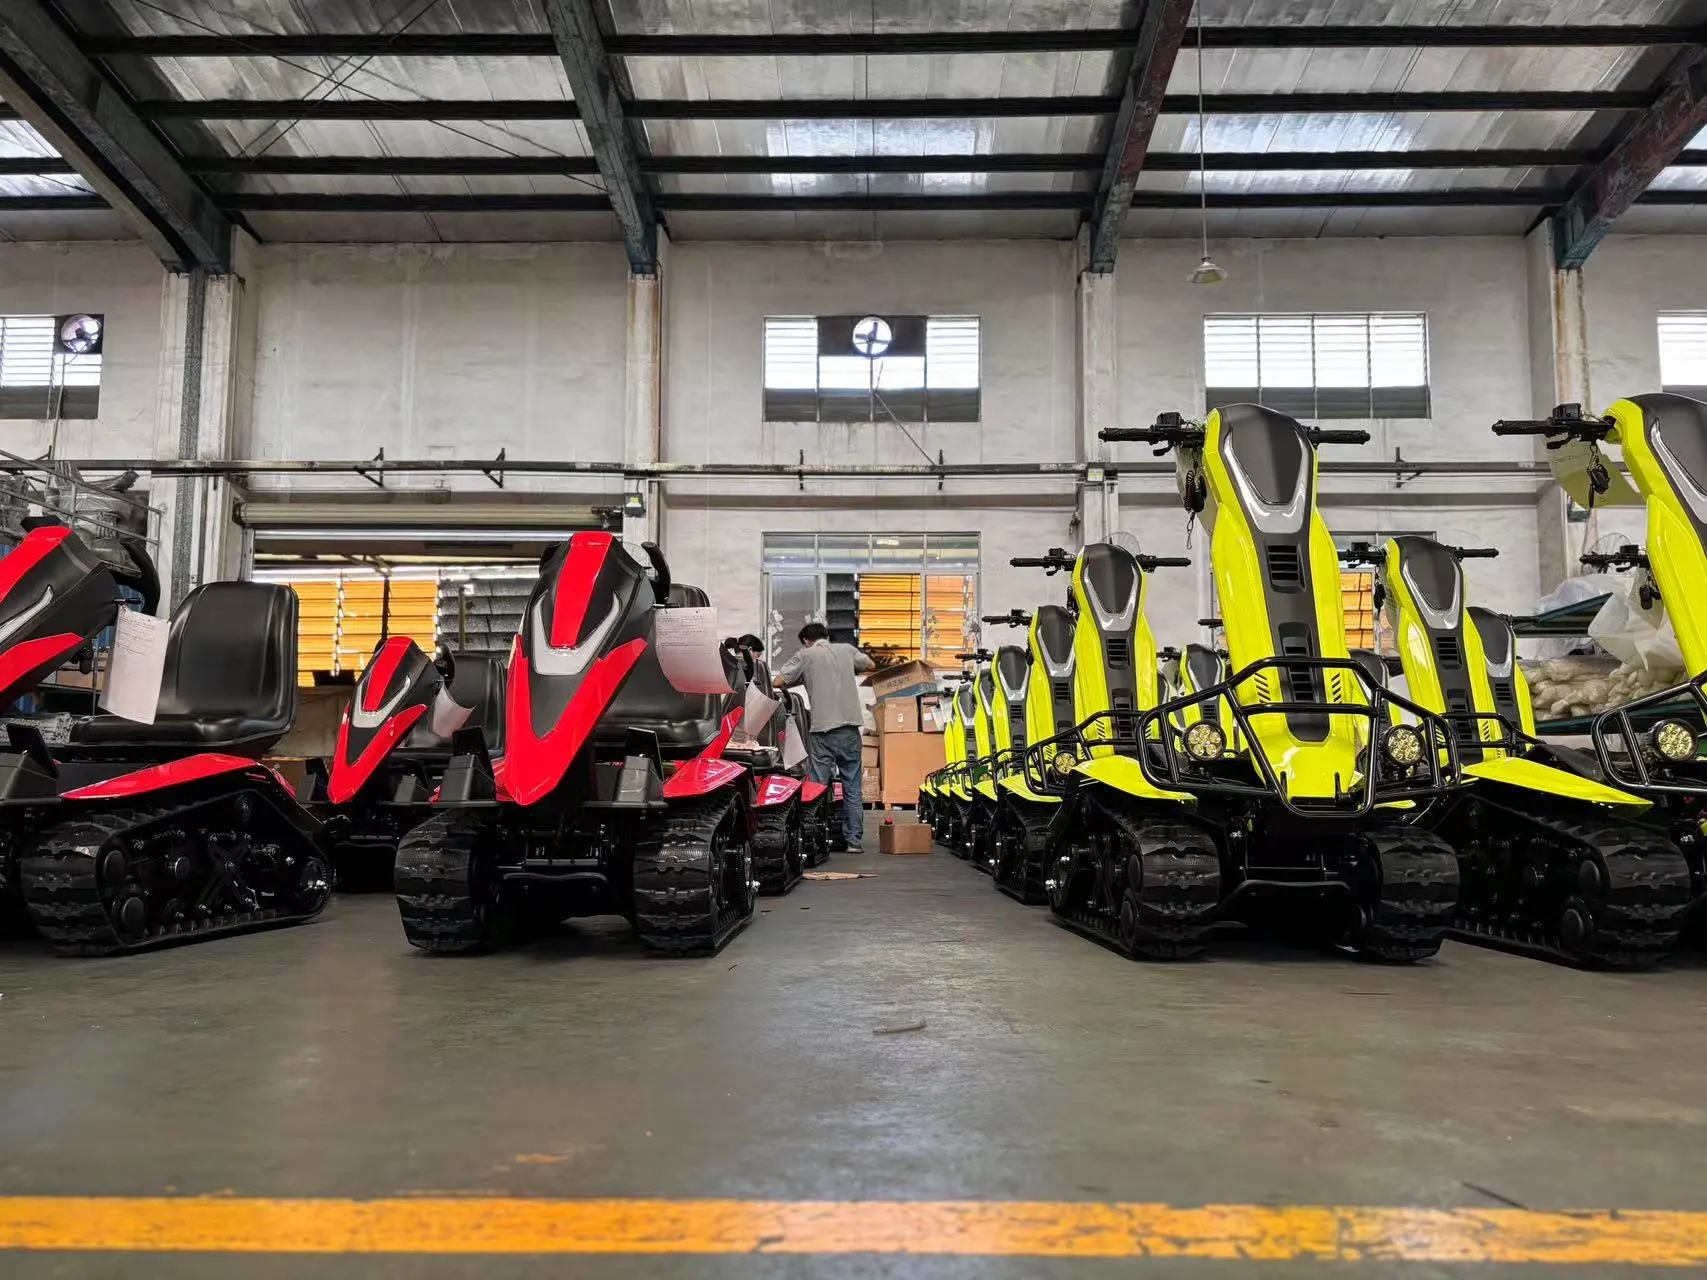 New Batch of Snowmobiles(ETV TANK) Rolls Off the Production Line